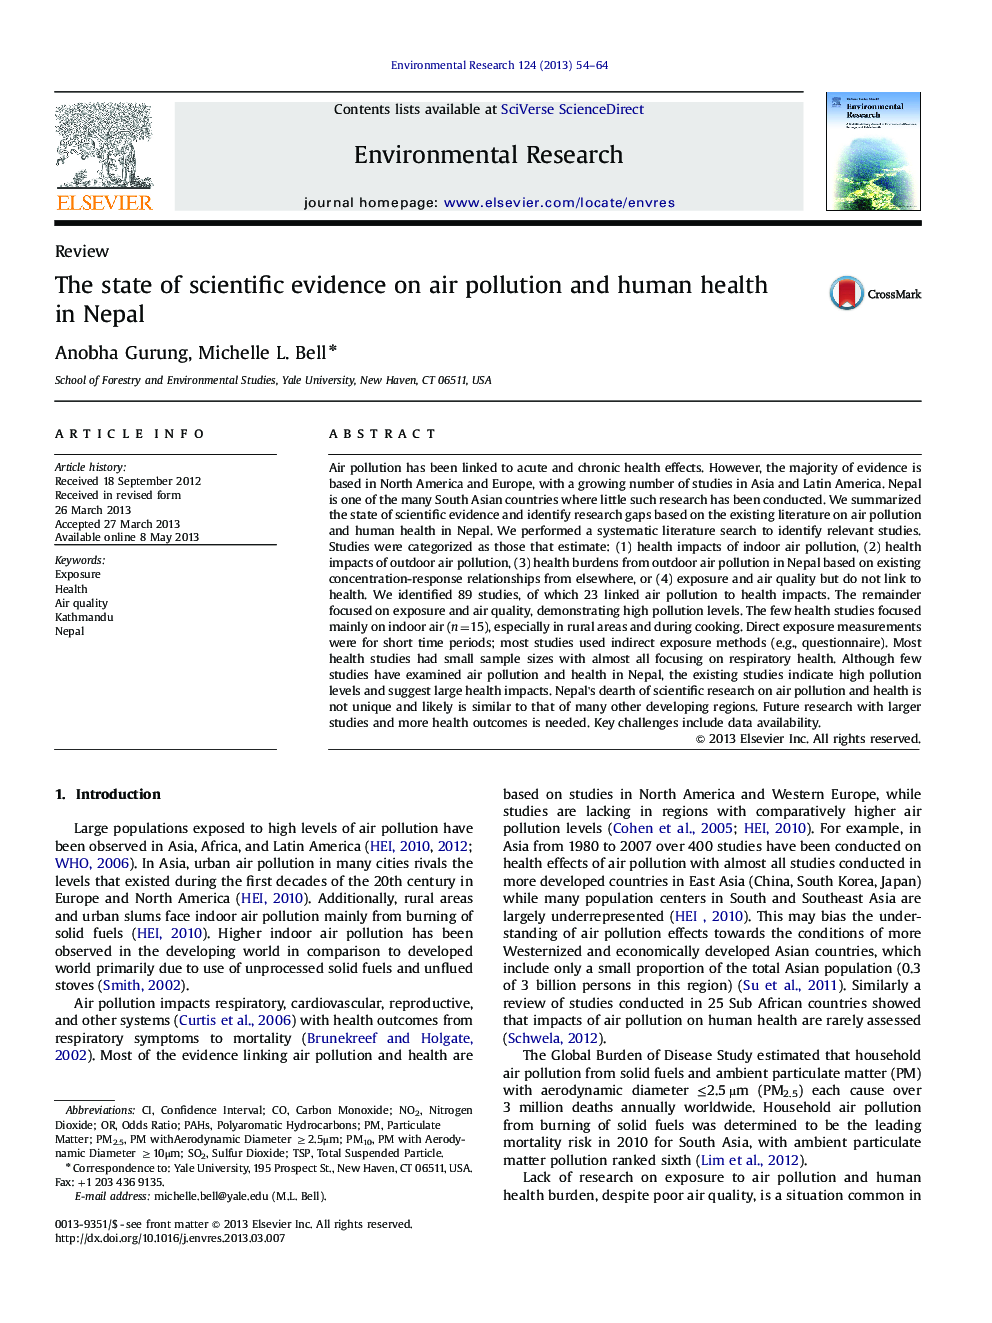 The state of scientific evidence on air pollution and human health in Nepal